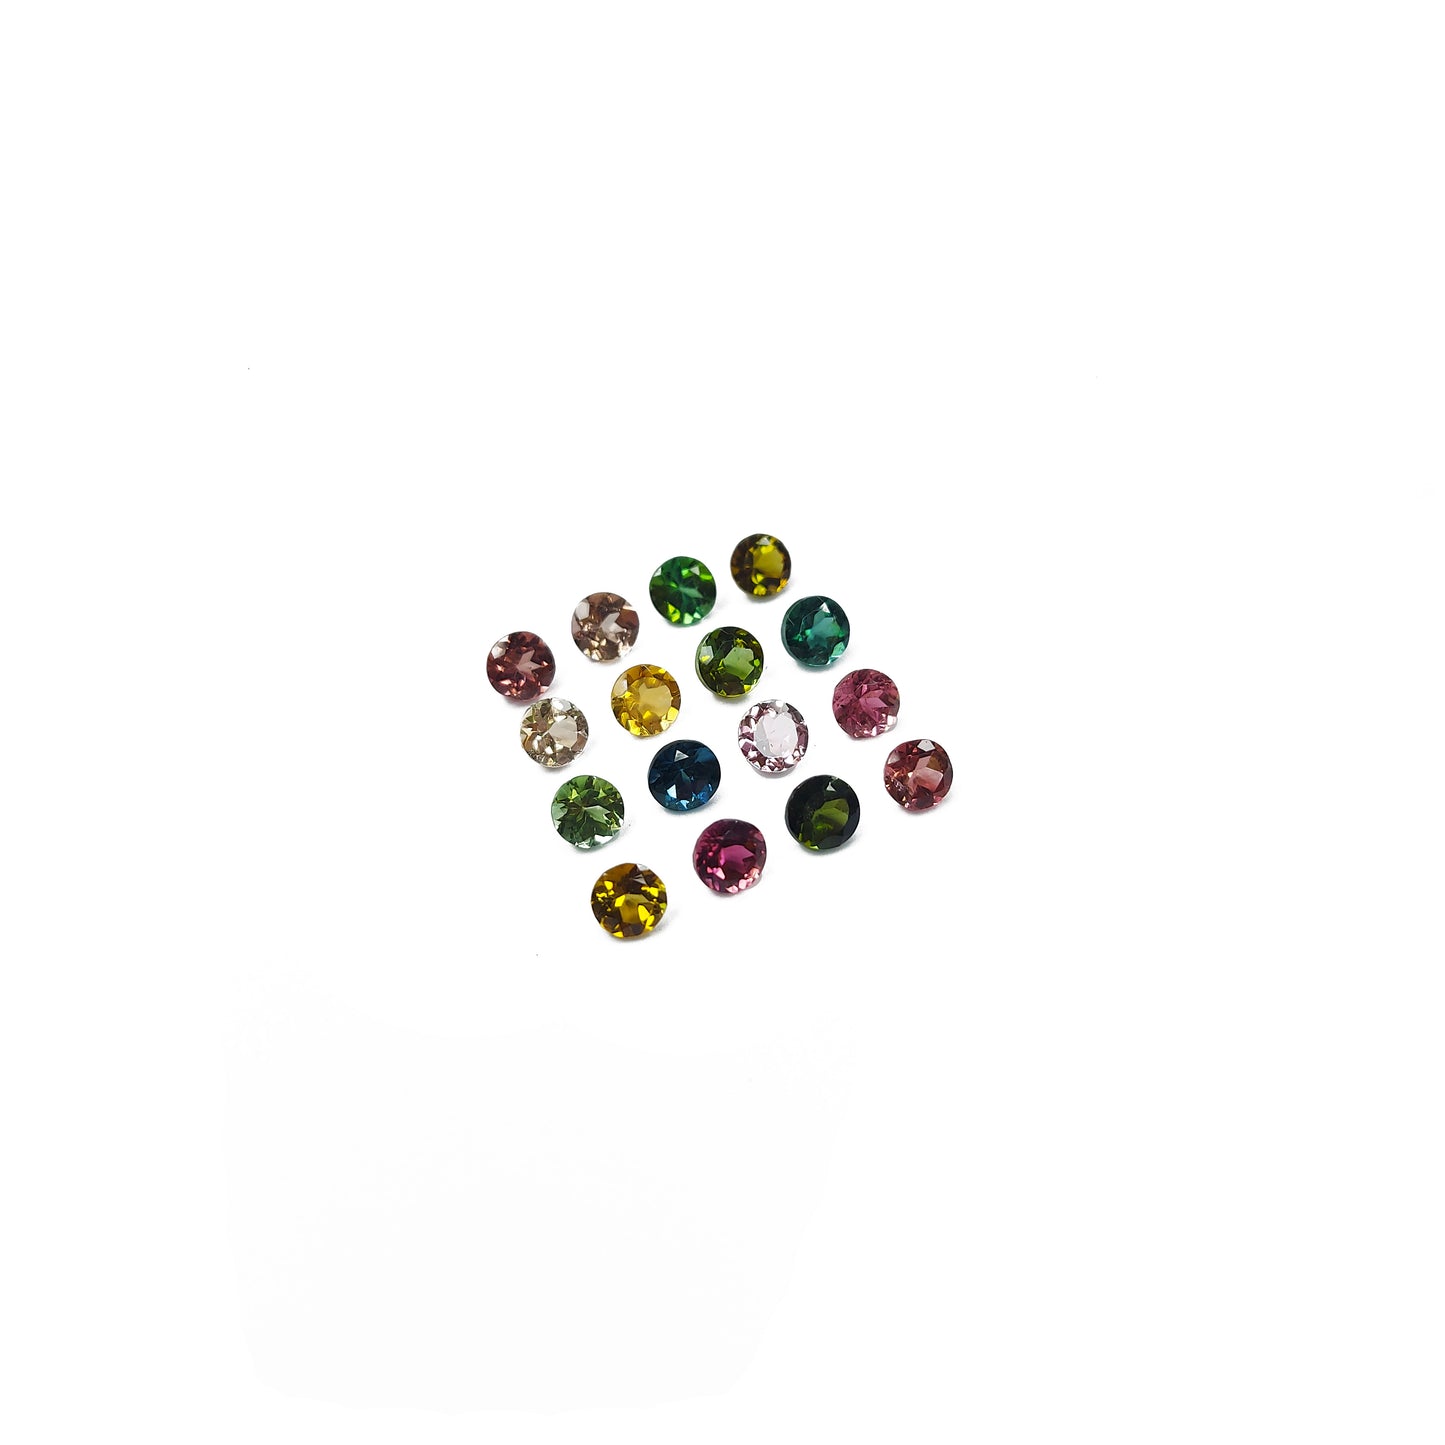 100% Natural Tourmaline Multi Color Calibrated Rounds | 20cts Lot